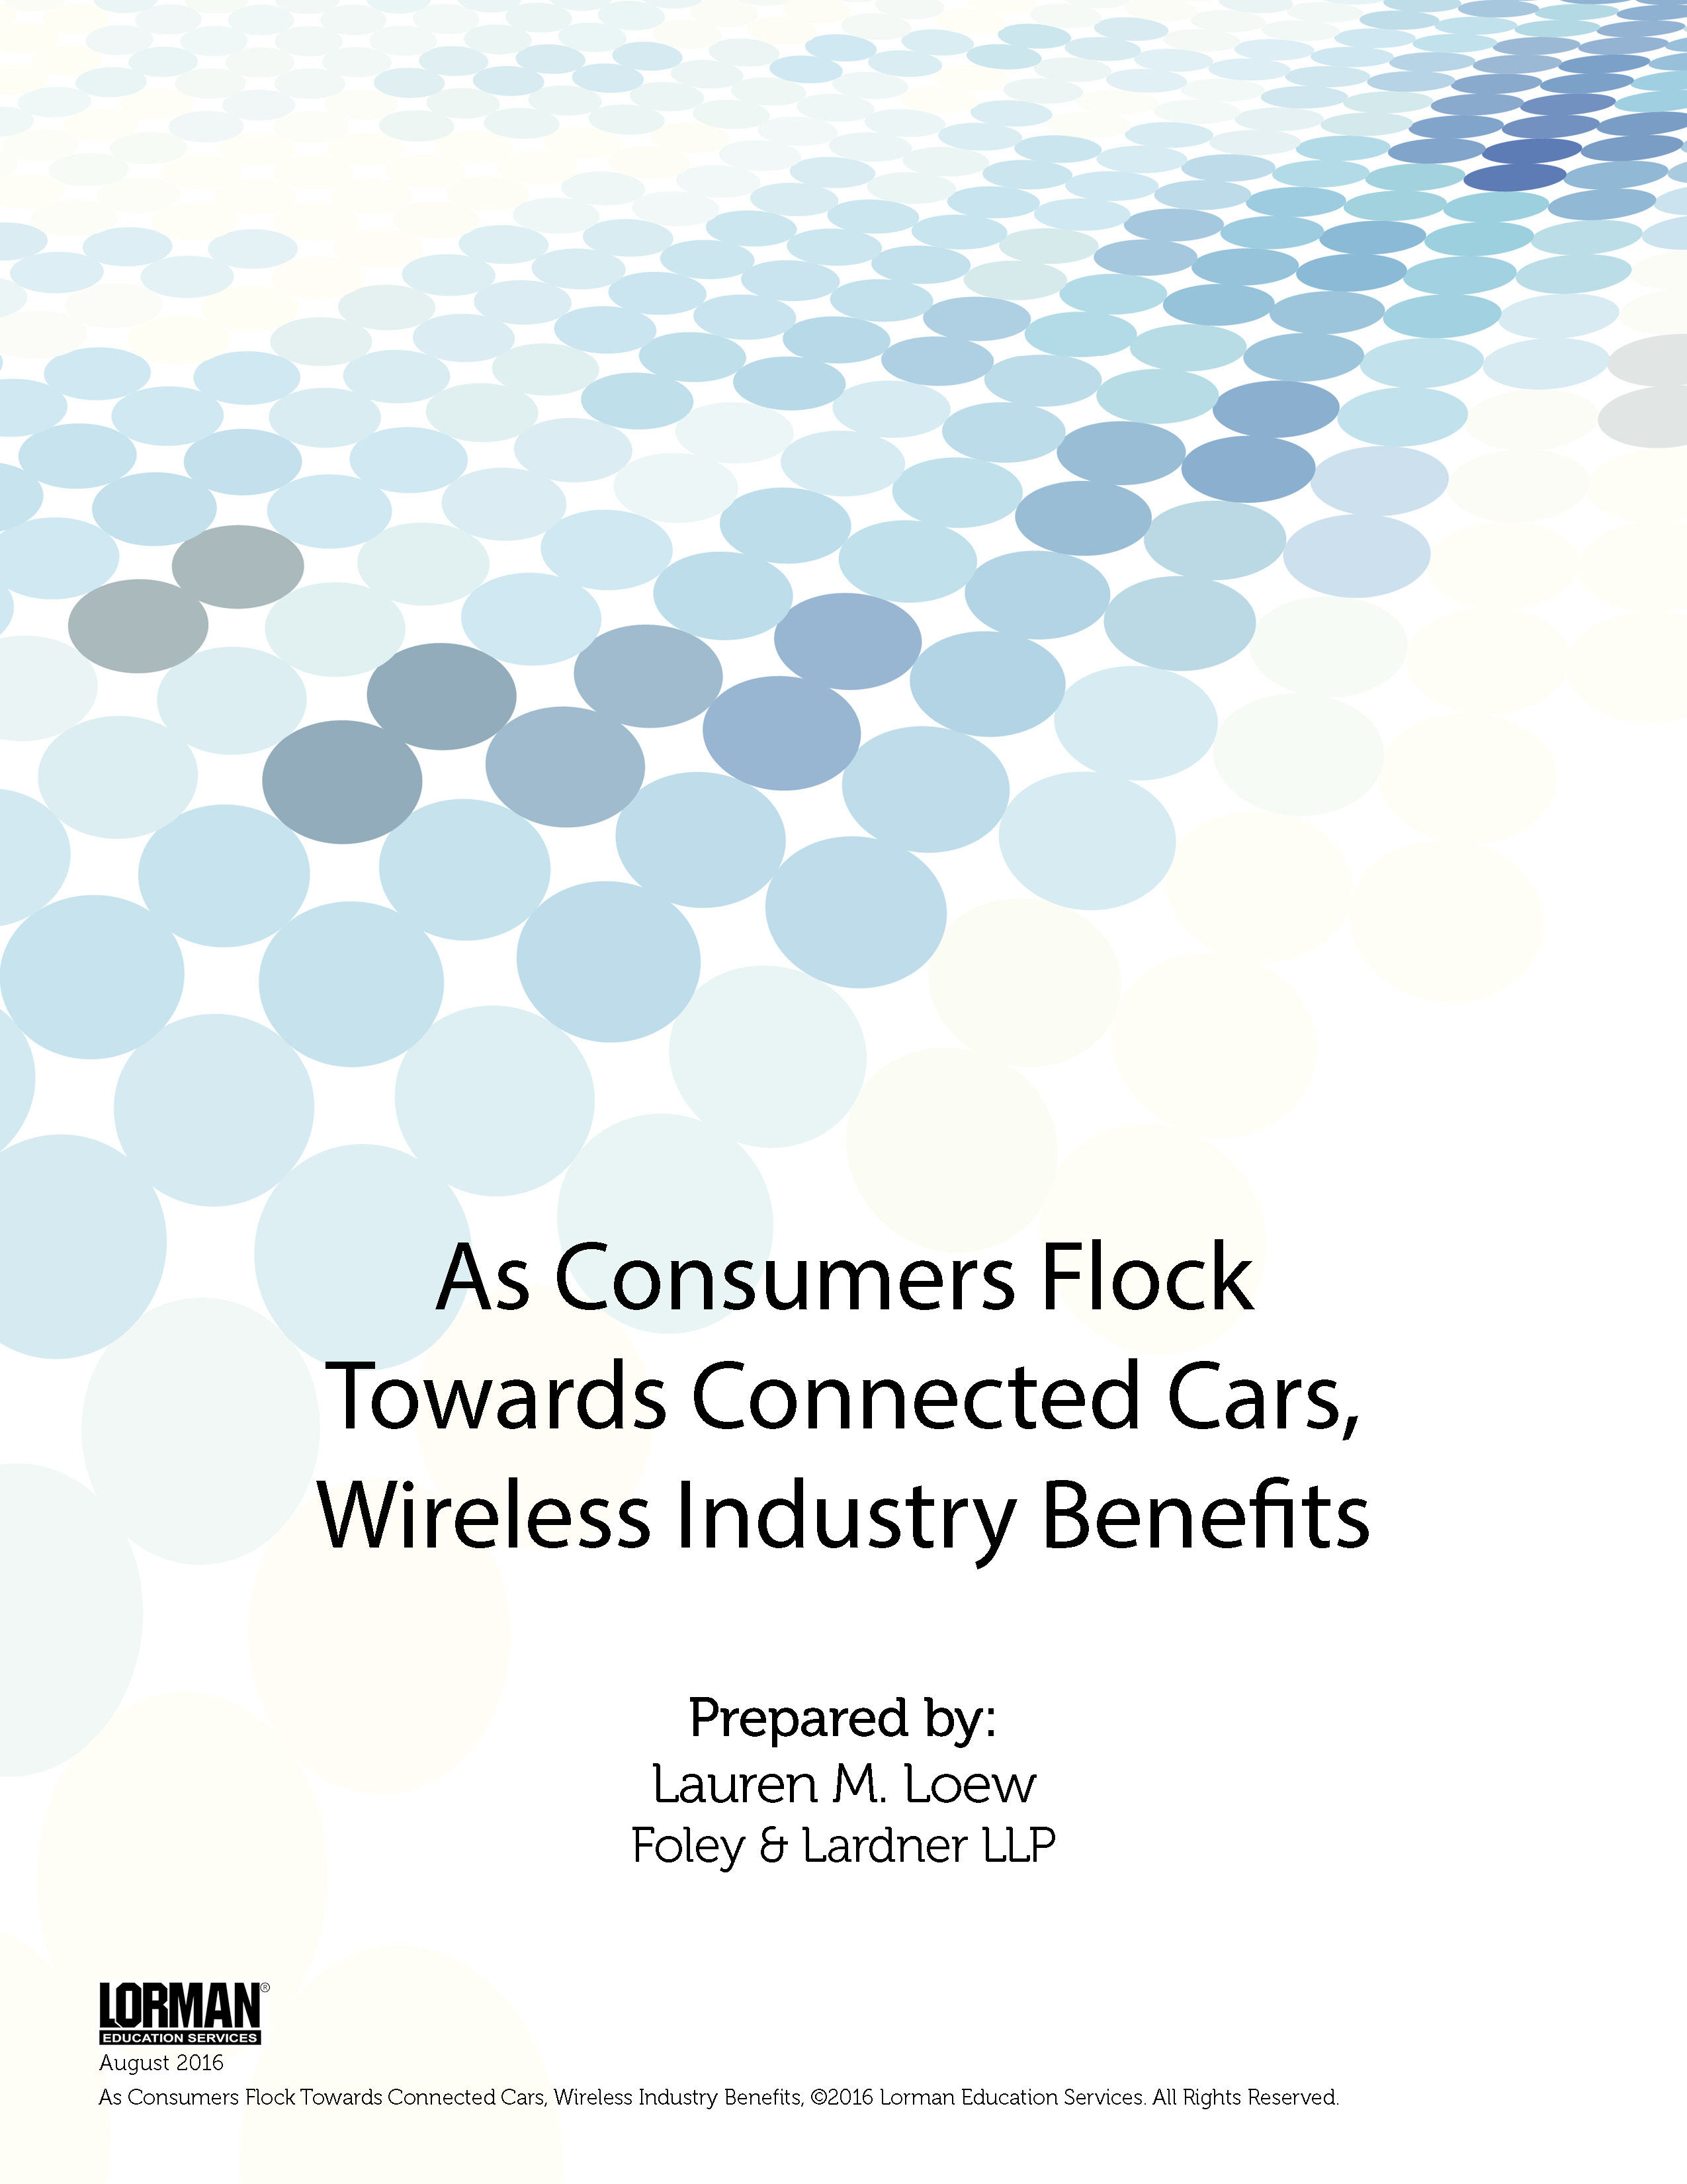 As Consumers Flock Towards Connected Cars, Wireless Industry Benefits